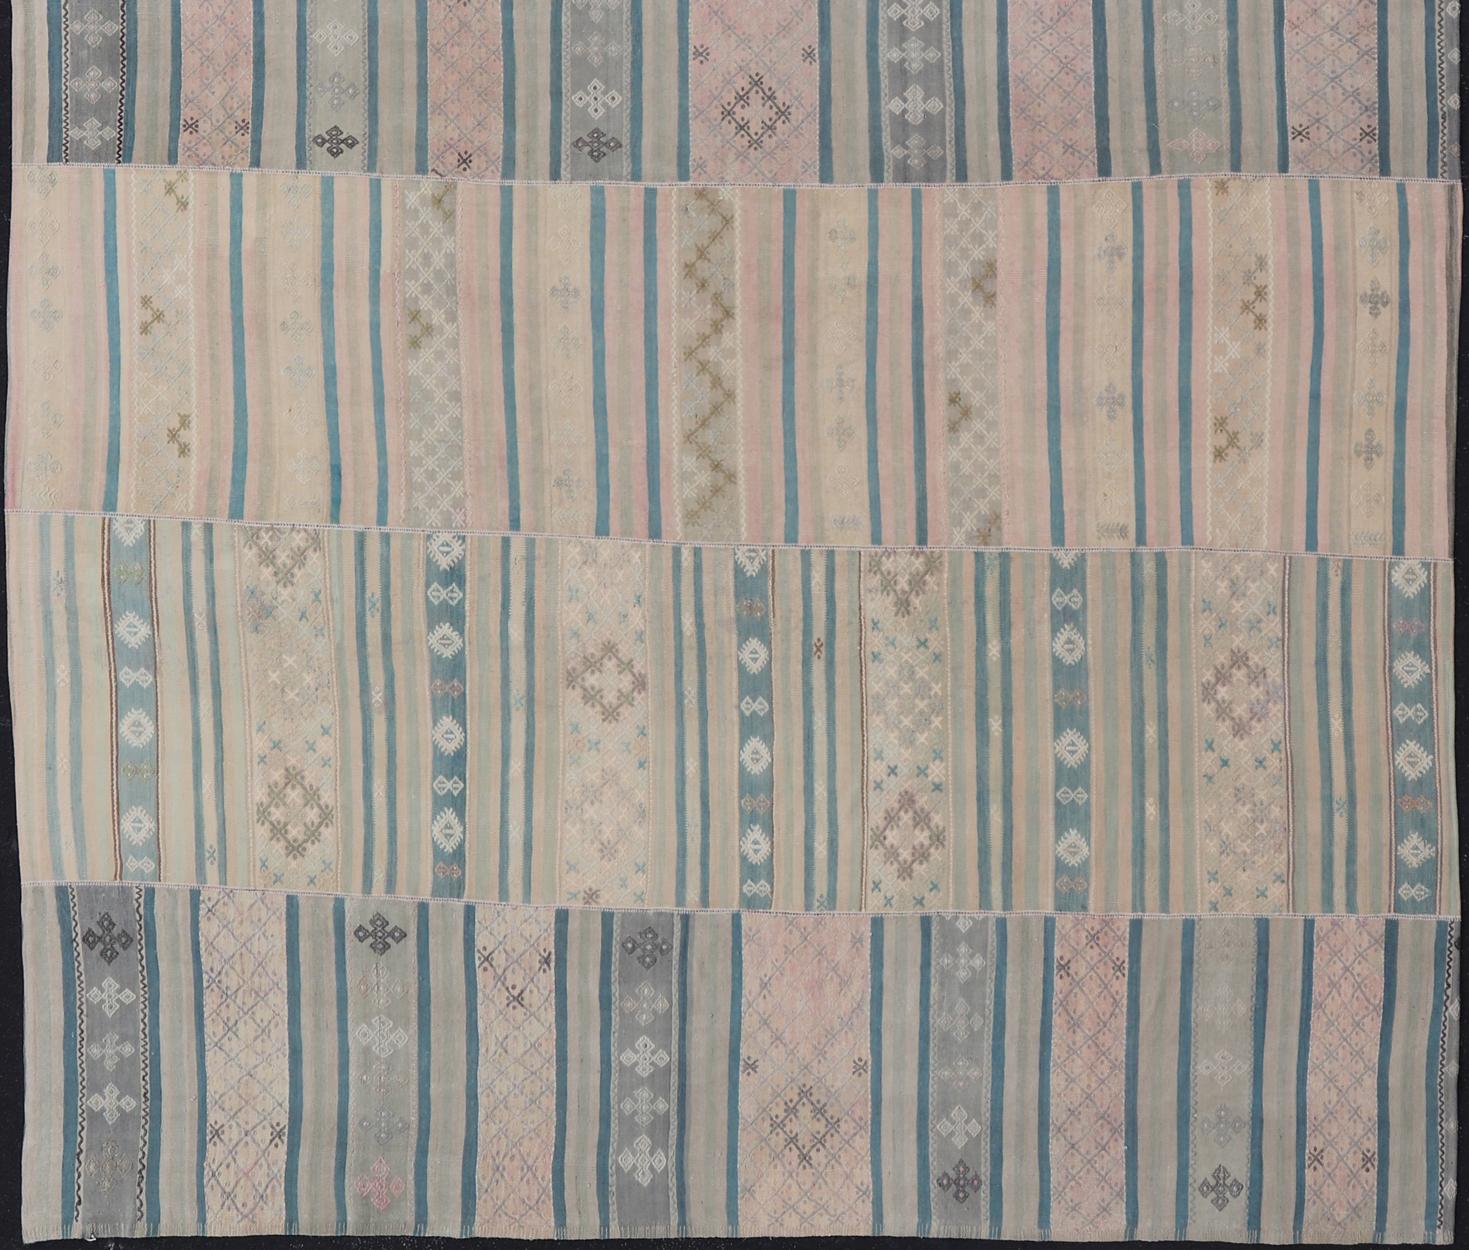 Large Vintage Paneled Kilim Flat-Weave in Blue, Pink, Taupe, Gray, Light Brown For Sale 4